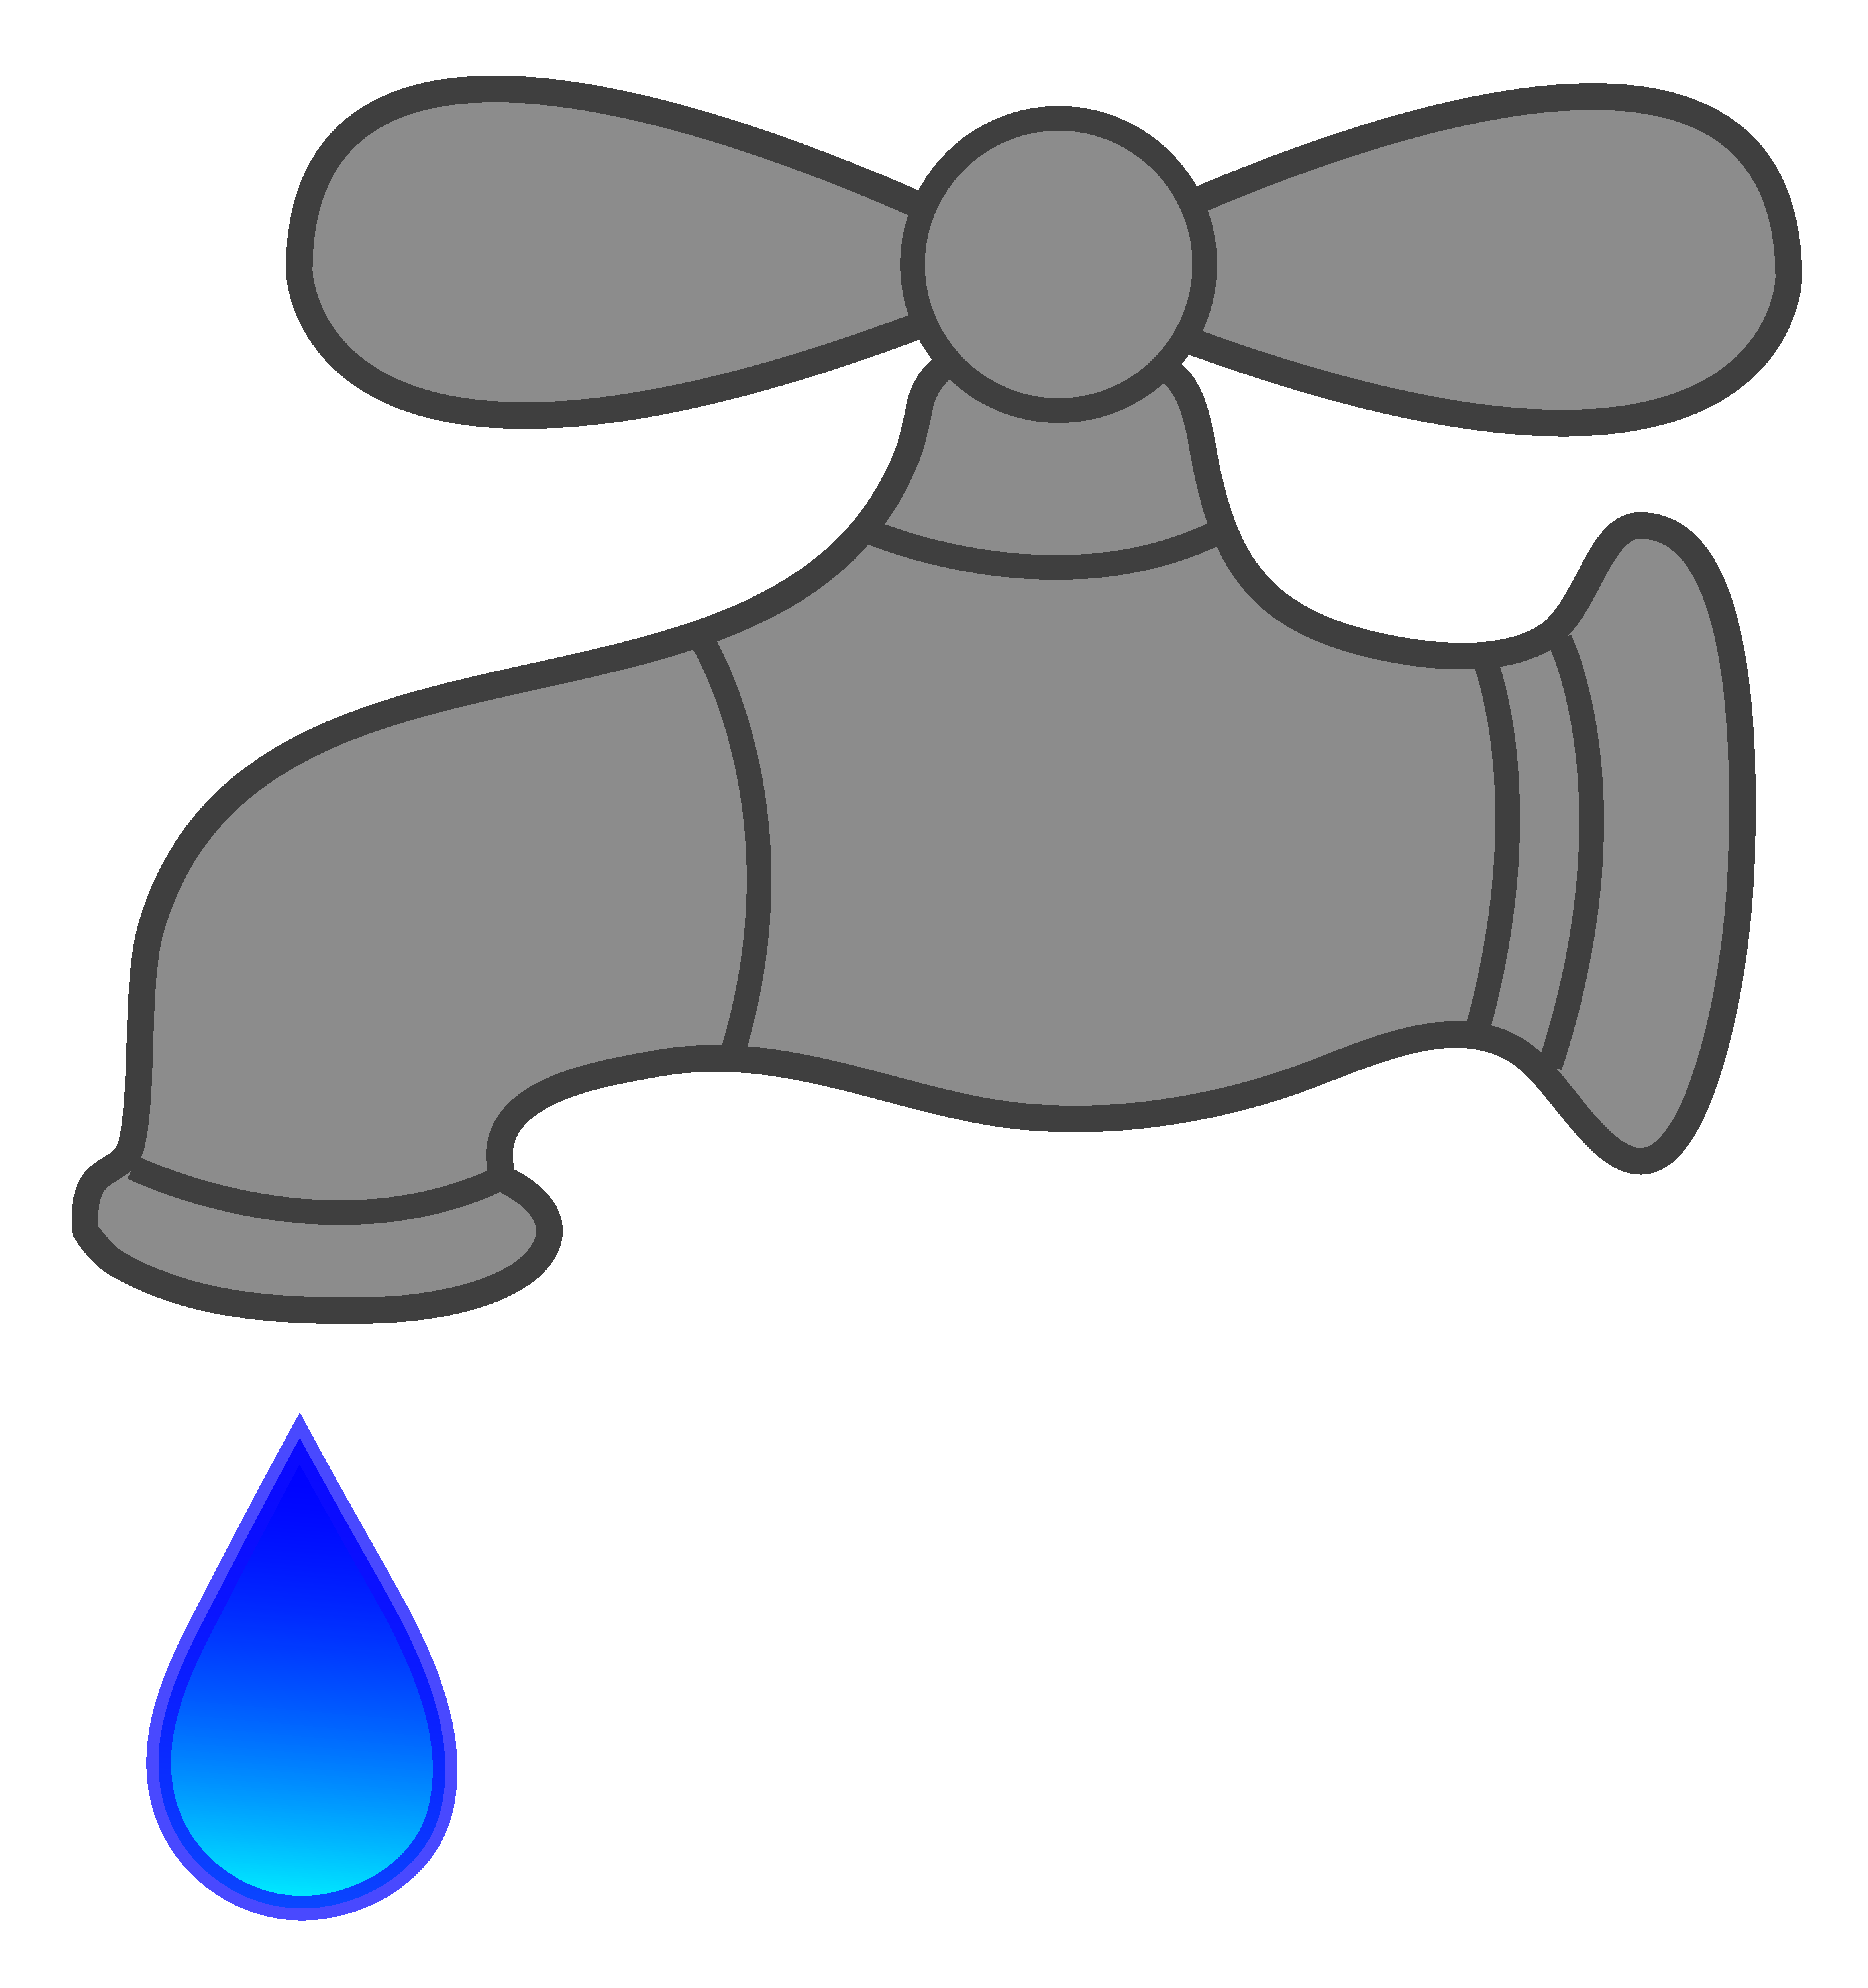 Drinking water clipart free.